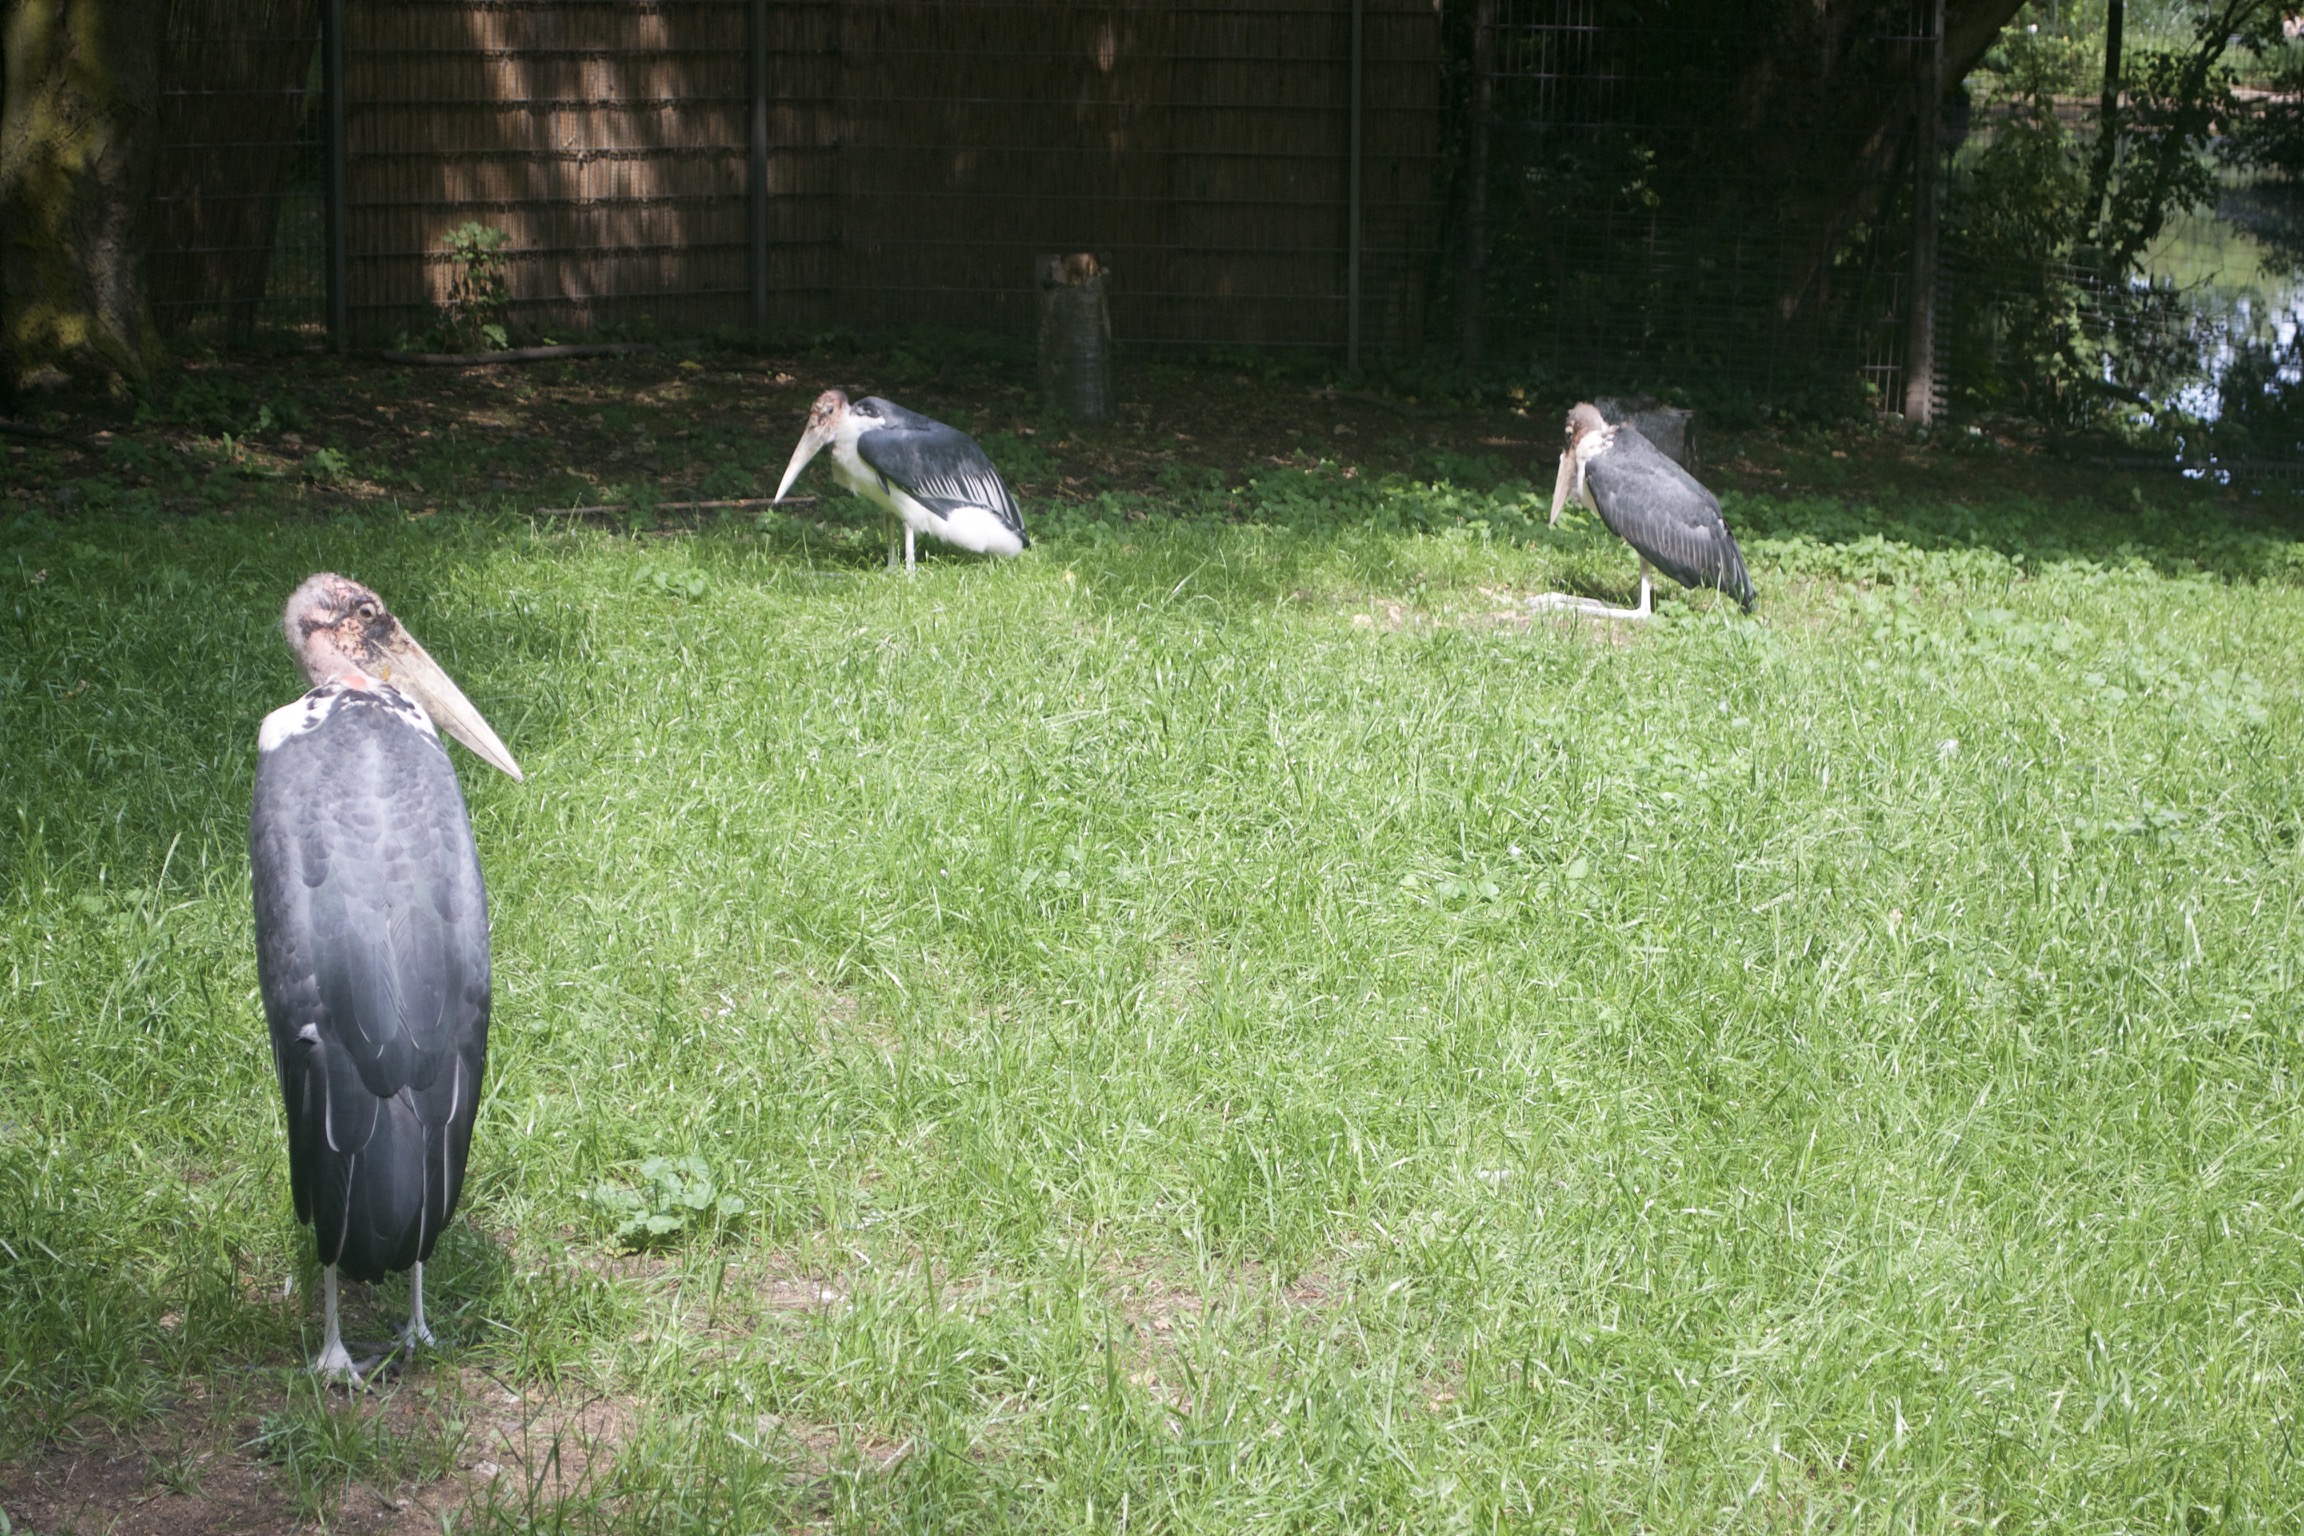 Three enormous black birds with bald heads and long beaks relax on grass.